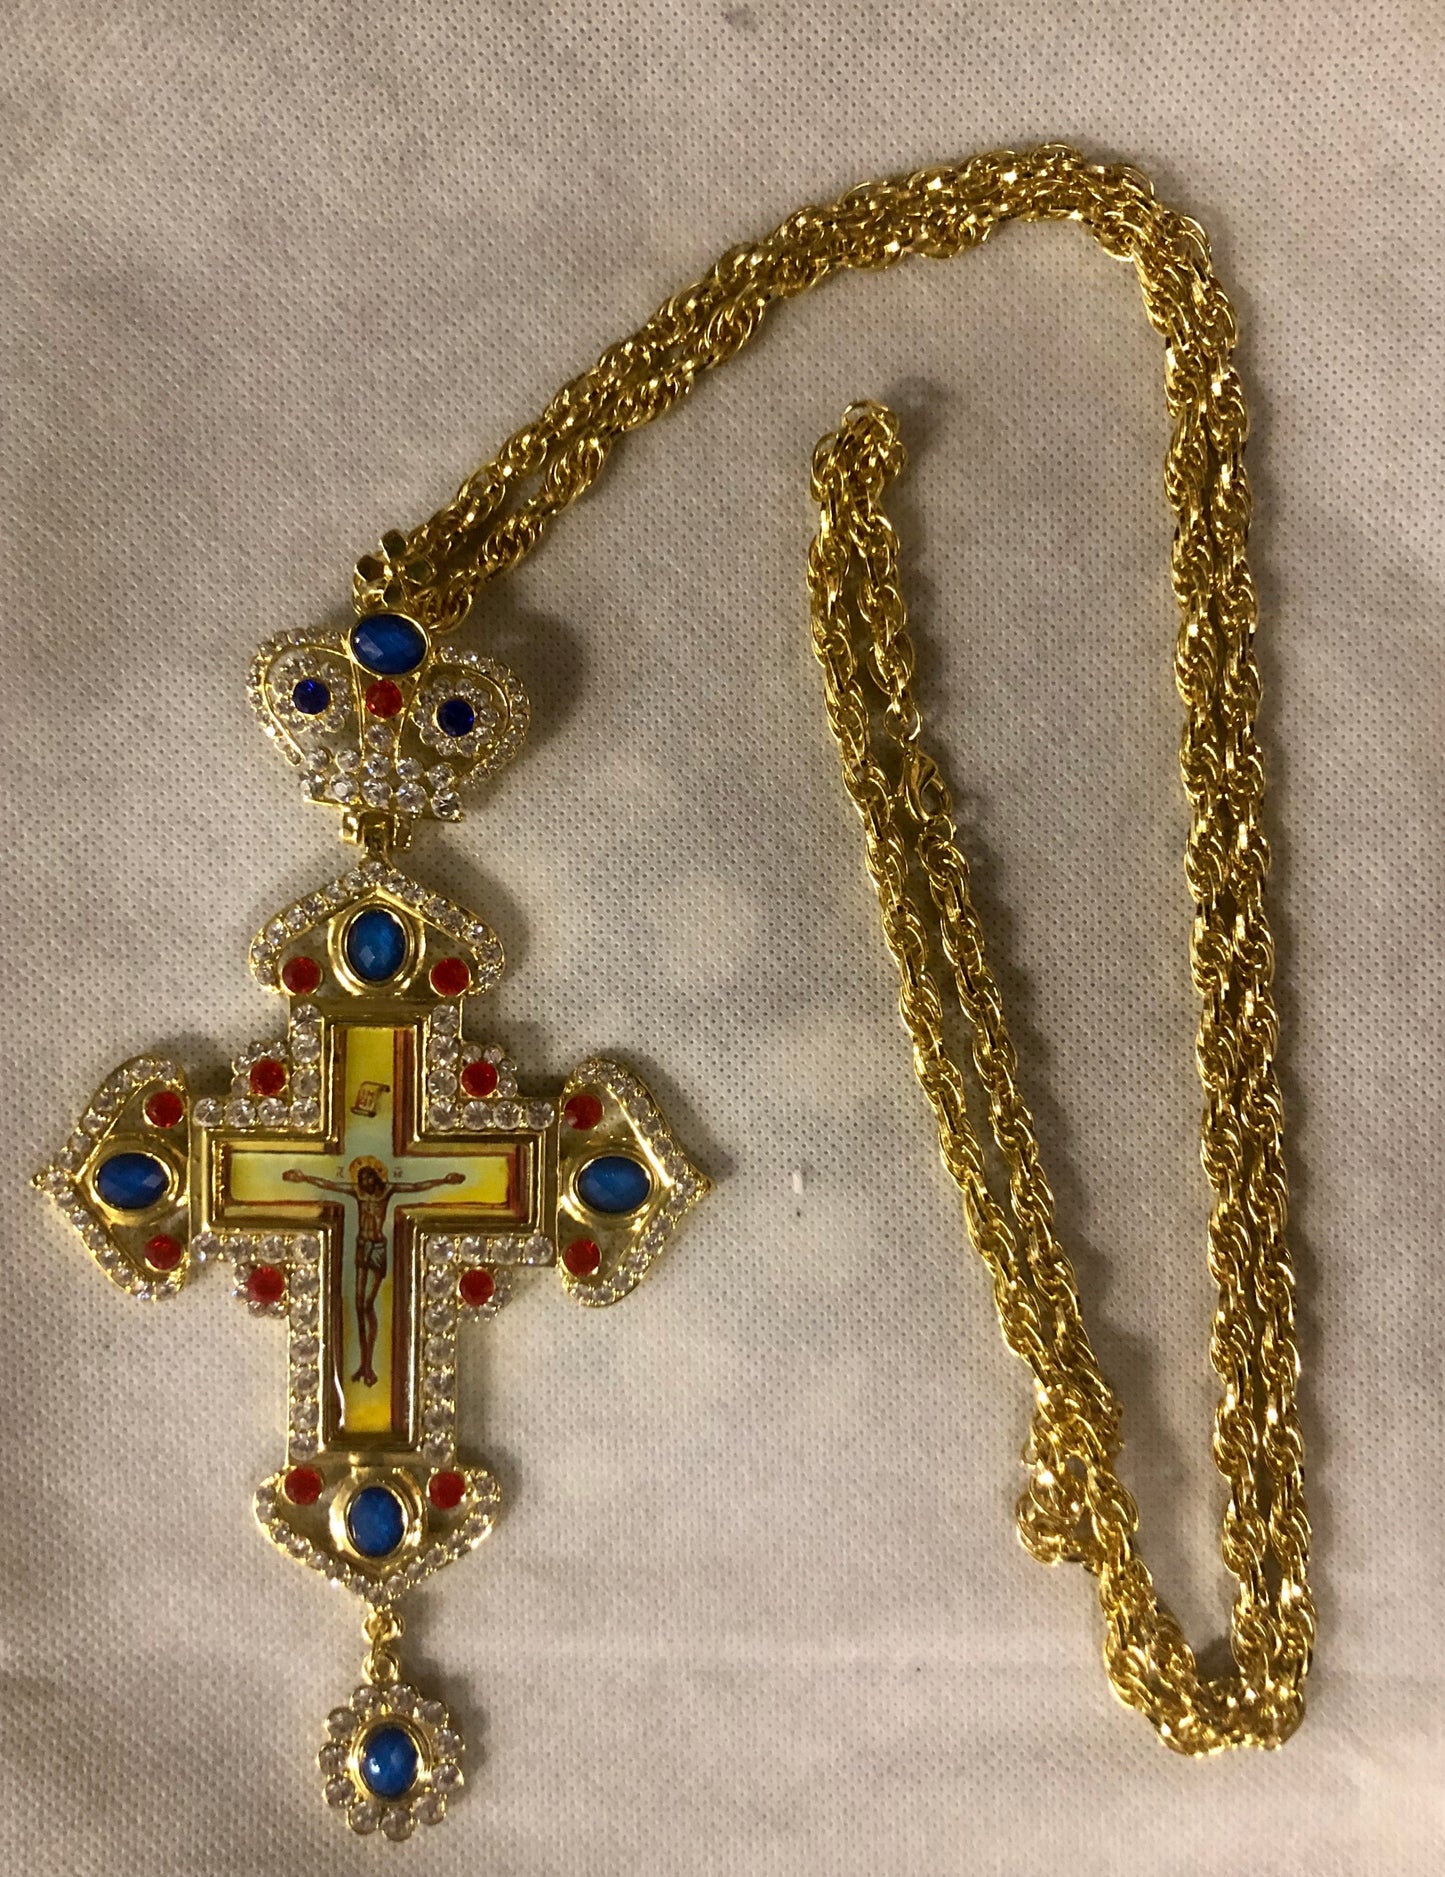 A 925 silver cross with silver chain.